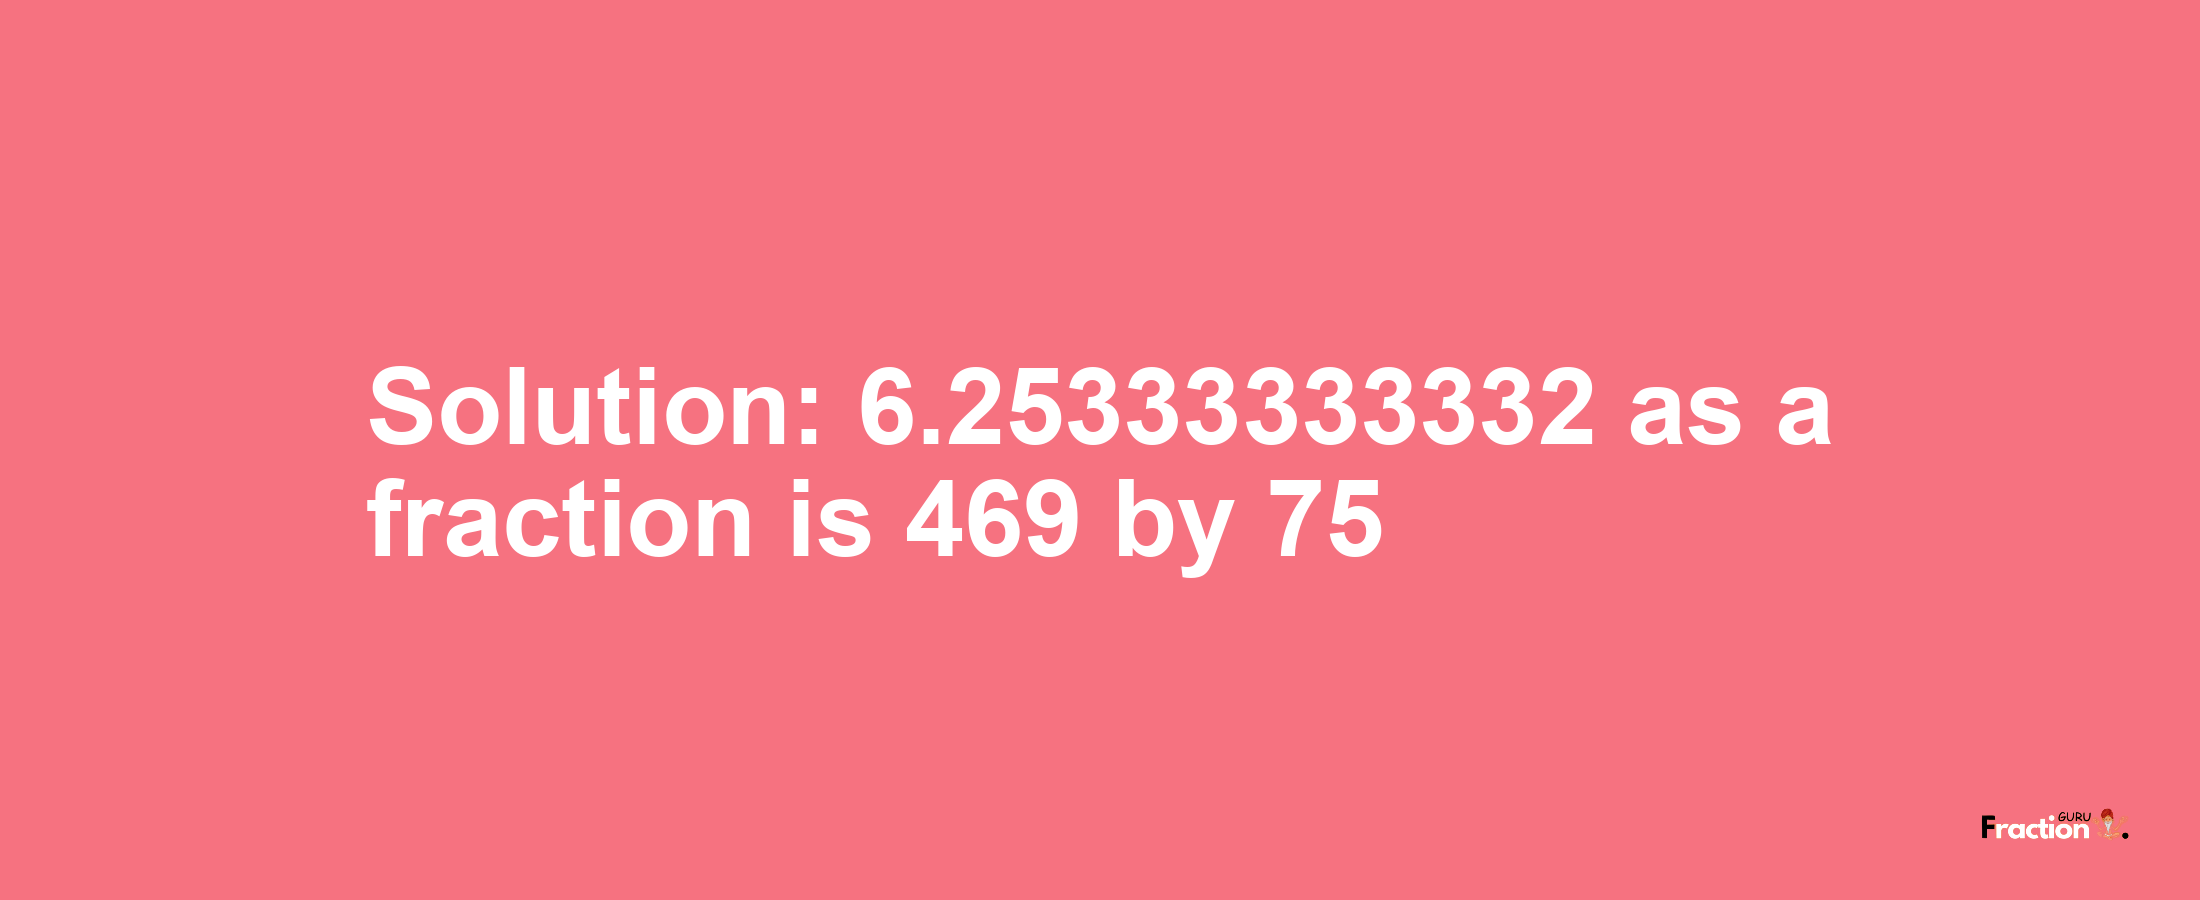 Solution:6.25333333332 as a fraction is 469/75